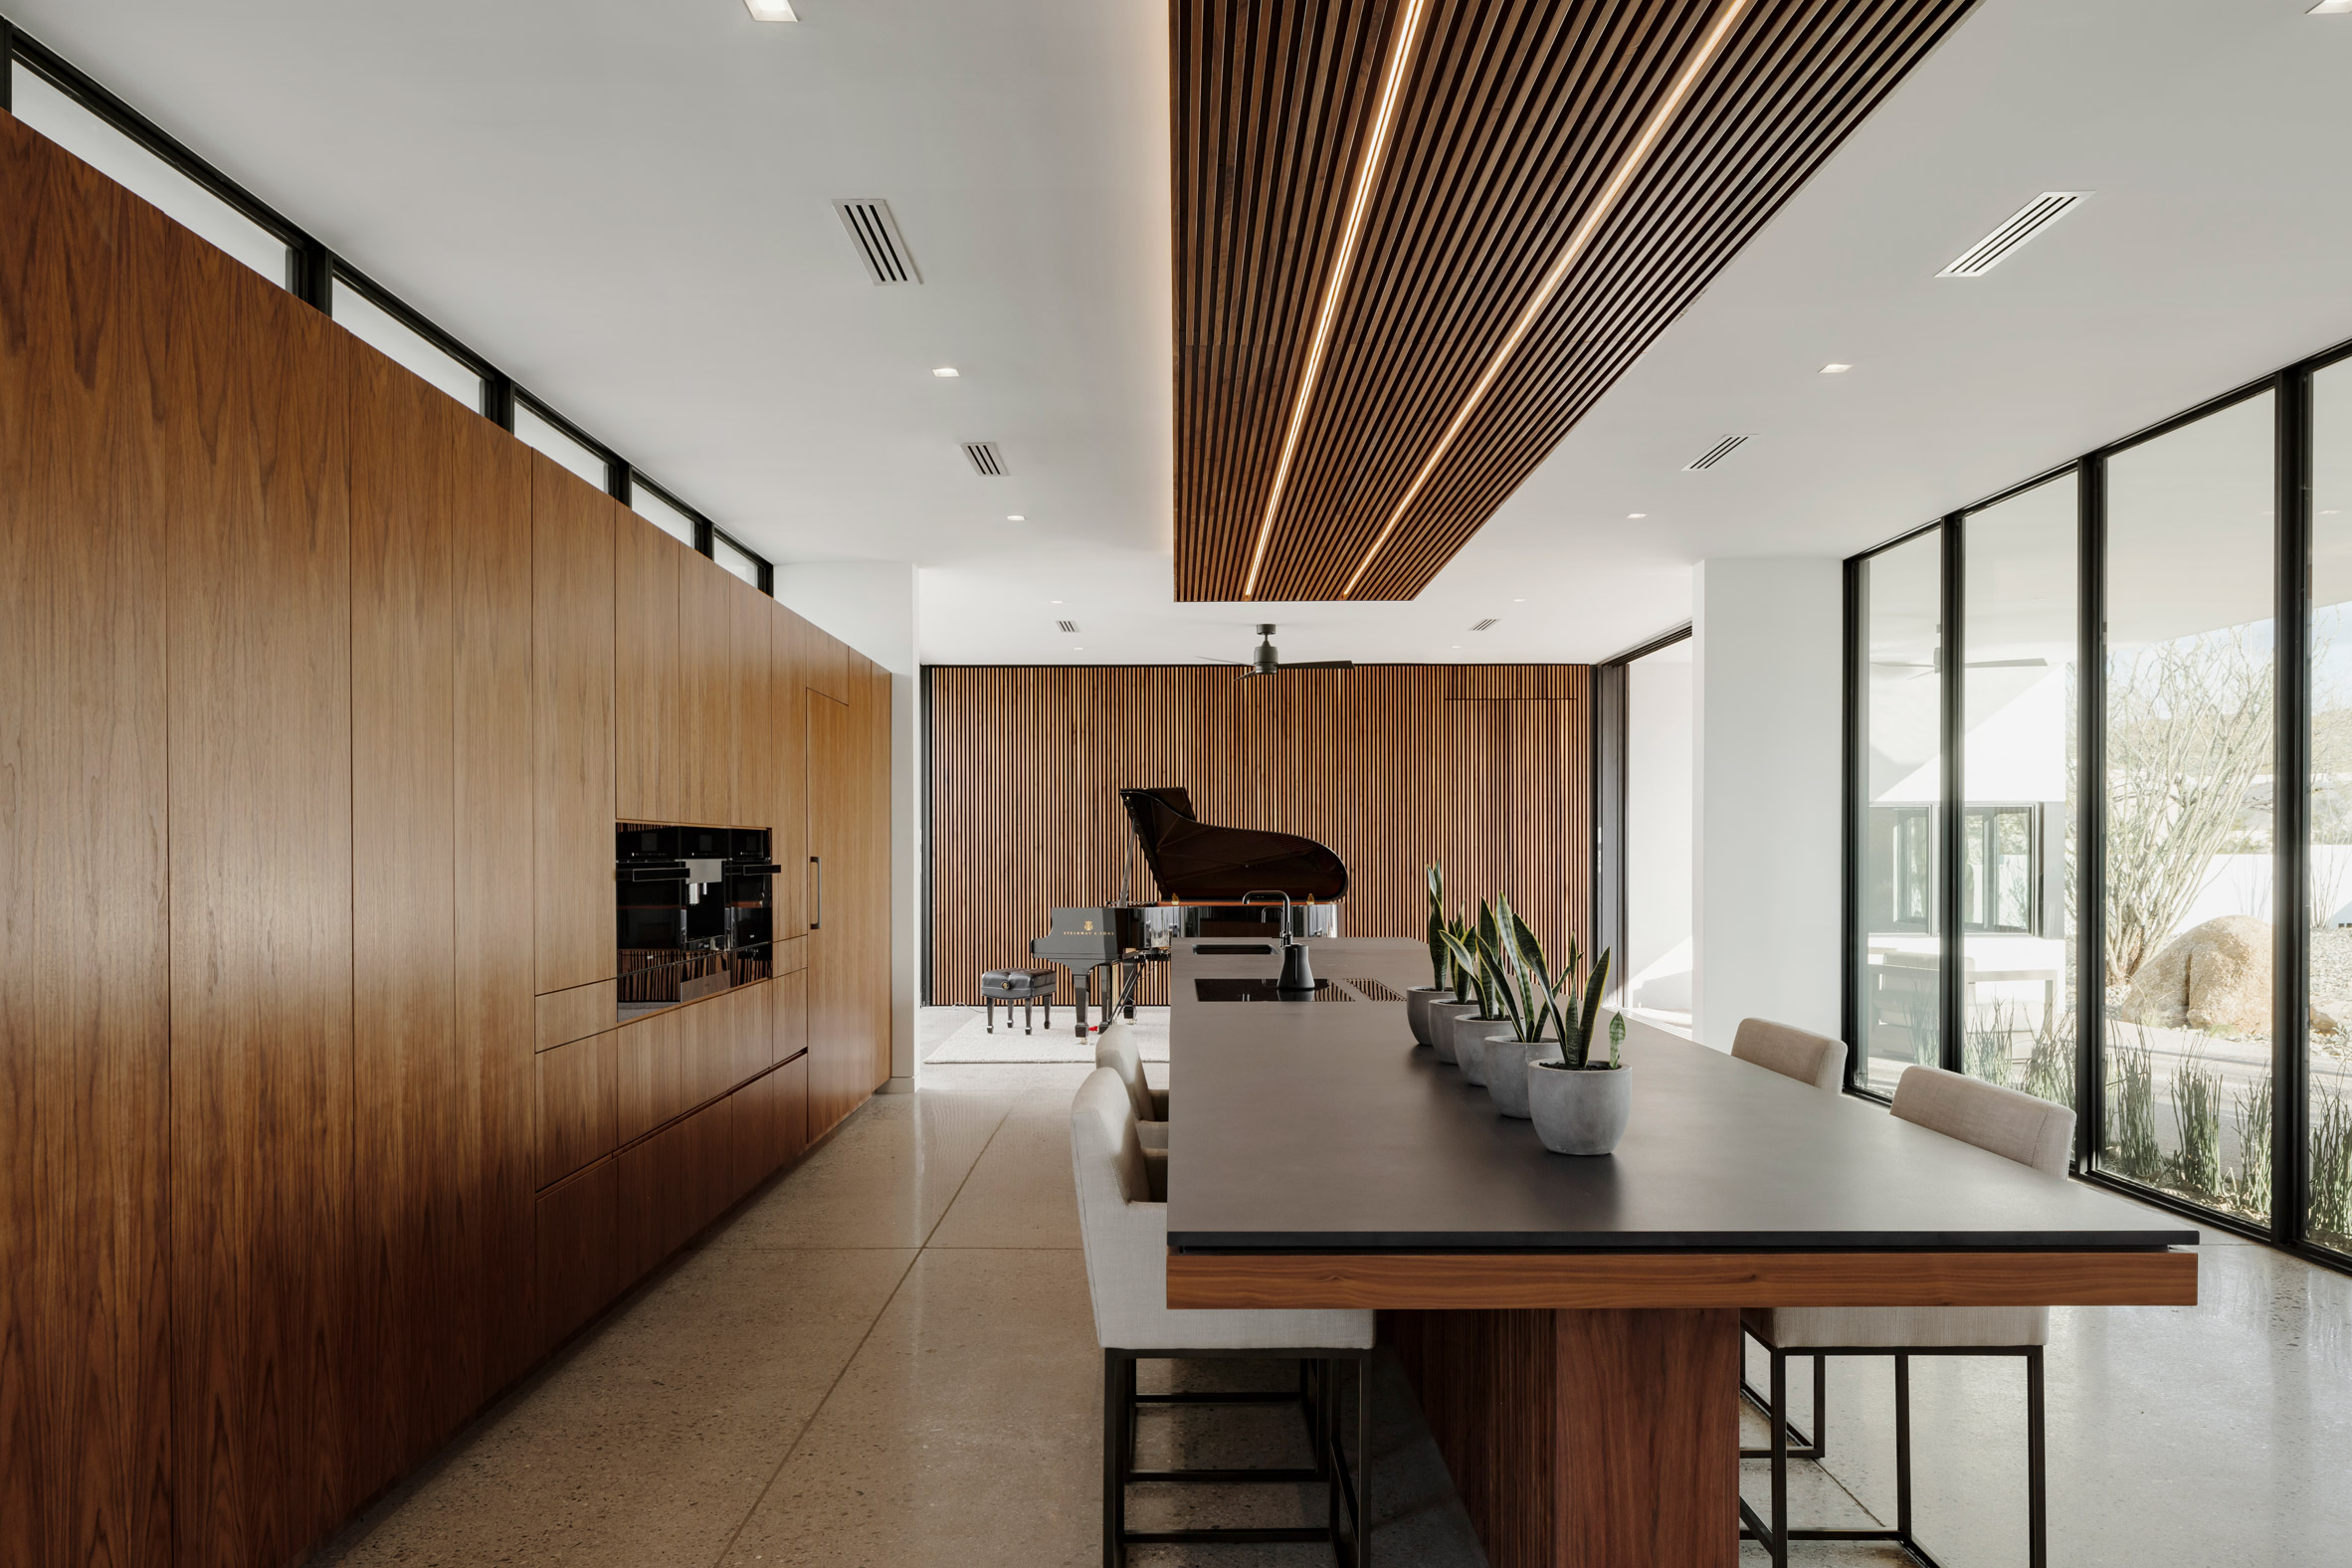 Walnut wood in kitchen and music room